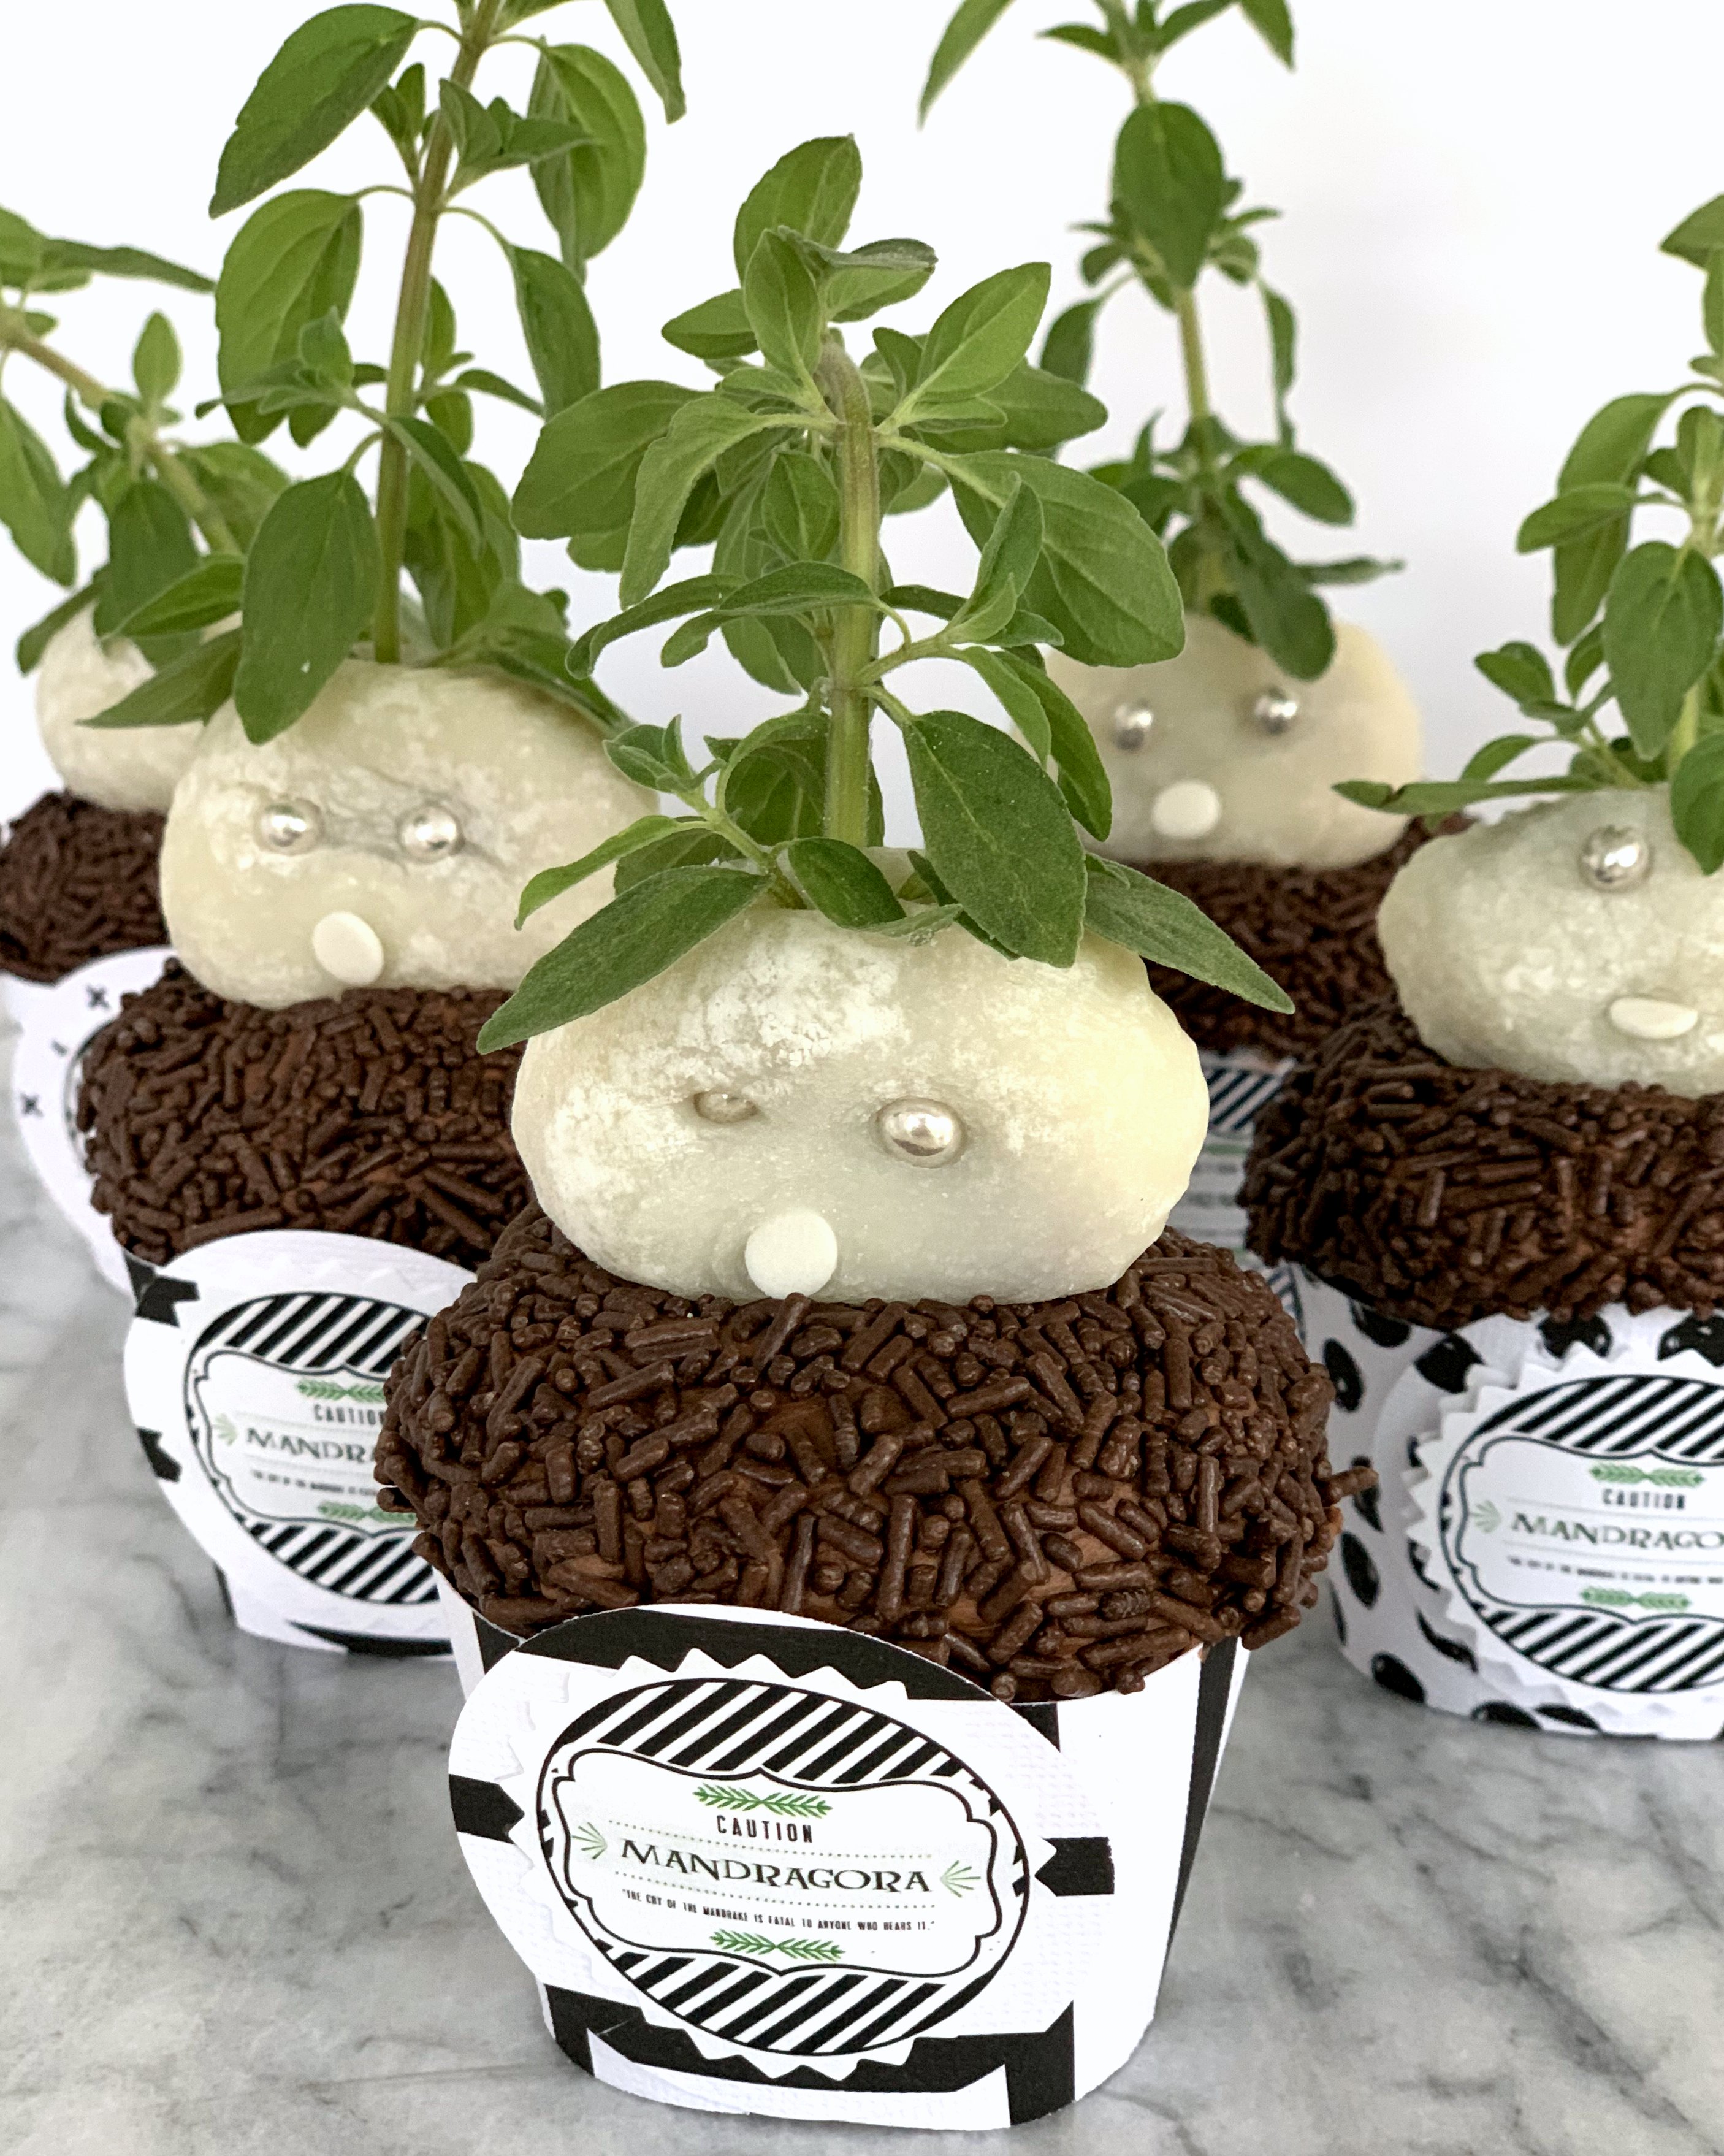 Harry Potter Party! How to make Mandrake cupcakes (with free printable "Mandragora" labels)